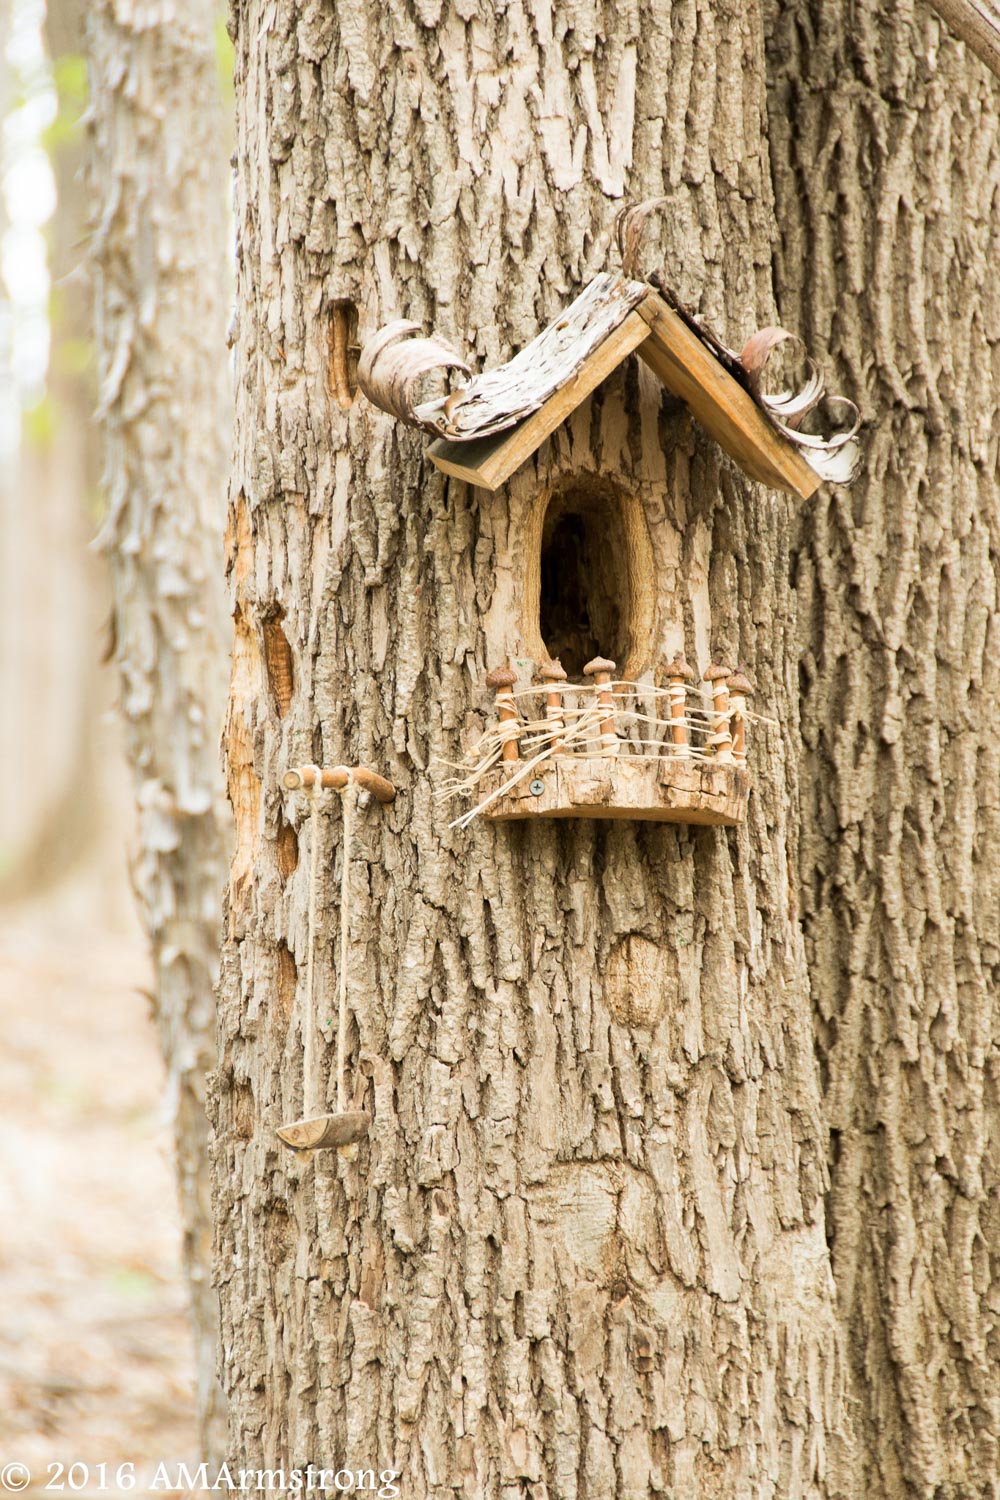 A small house carving on a tree at Tinker Nature Park